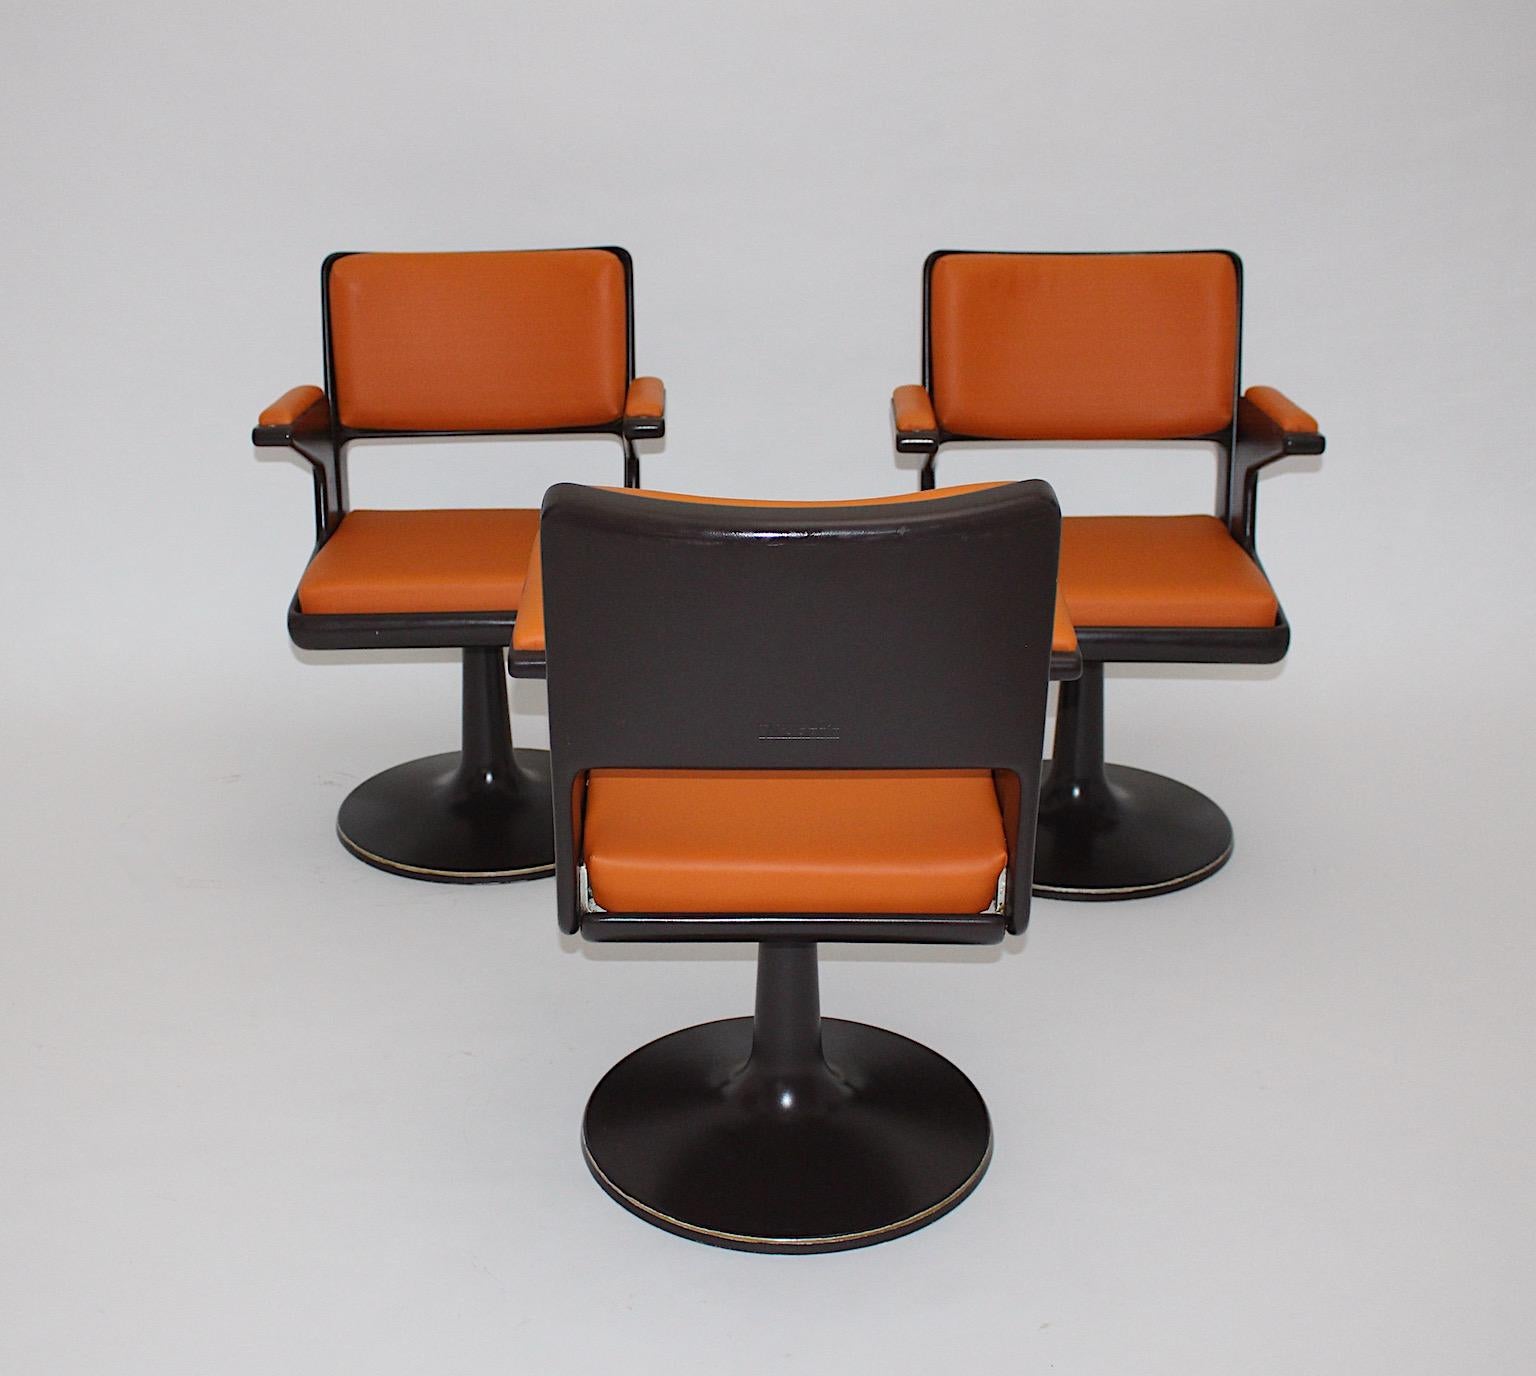 German Space Age Vintage Brown Plastic Orange Faux Leather Swivel Armchairs 1970s For Sale